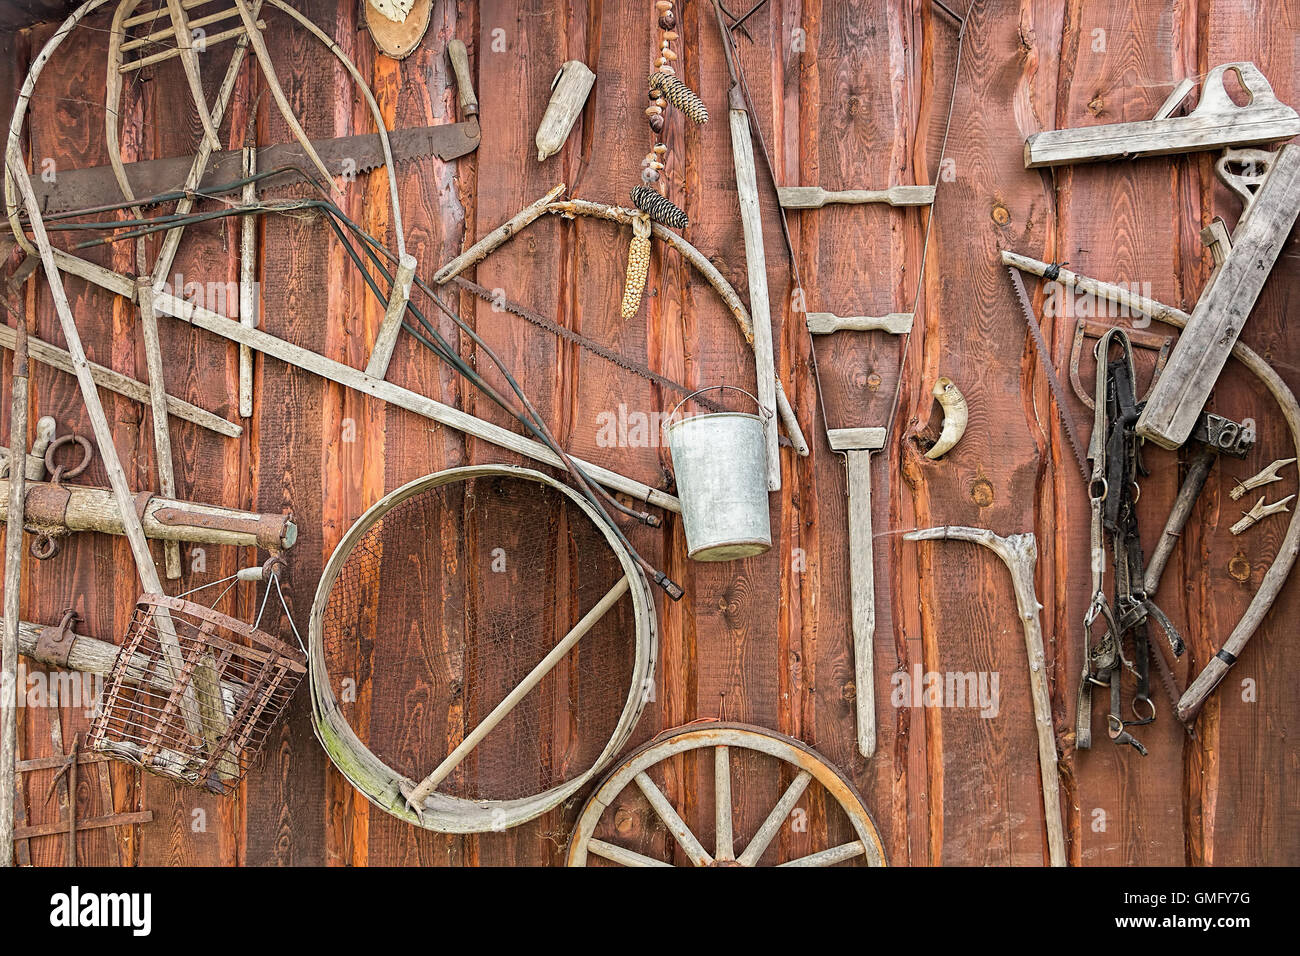 Rustic background, collection of old vintage farming tools on wooden wall Stock Photo